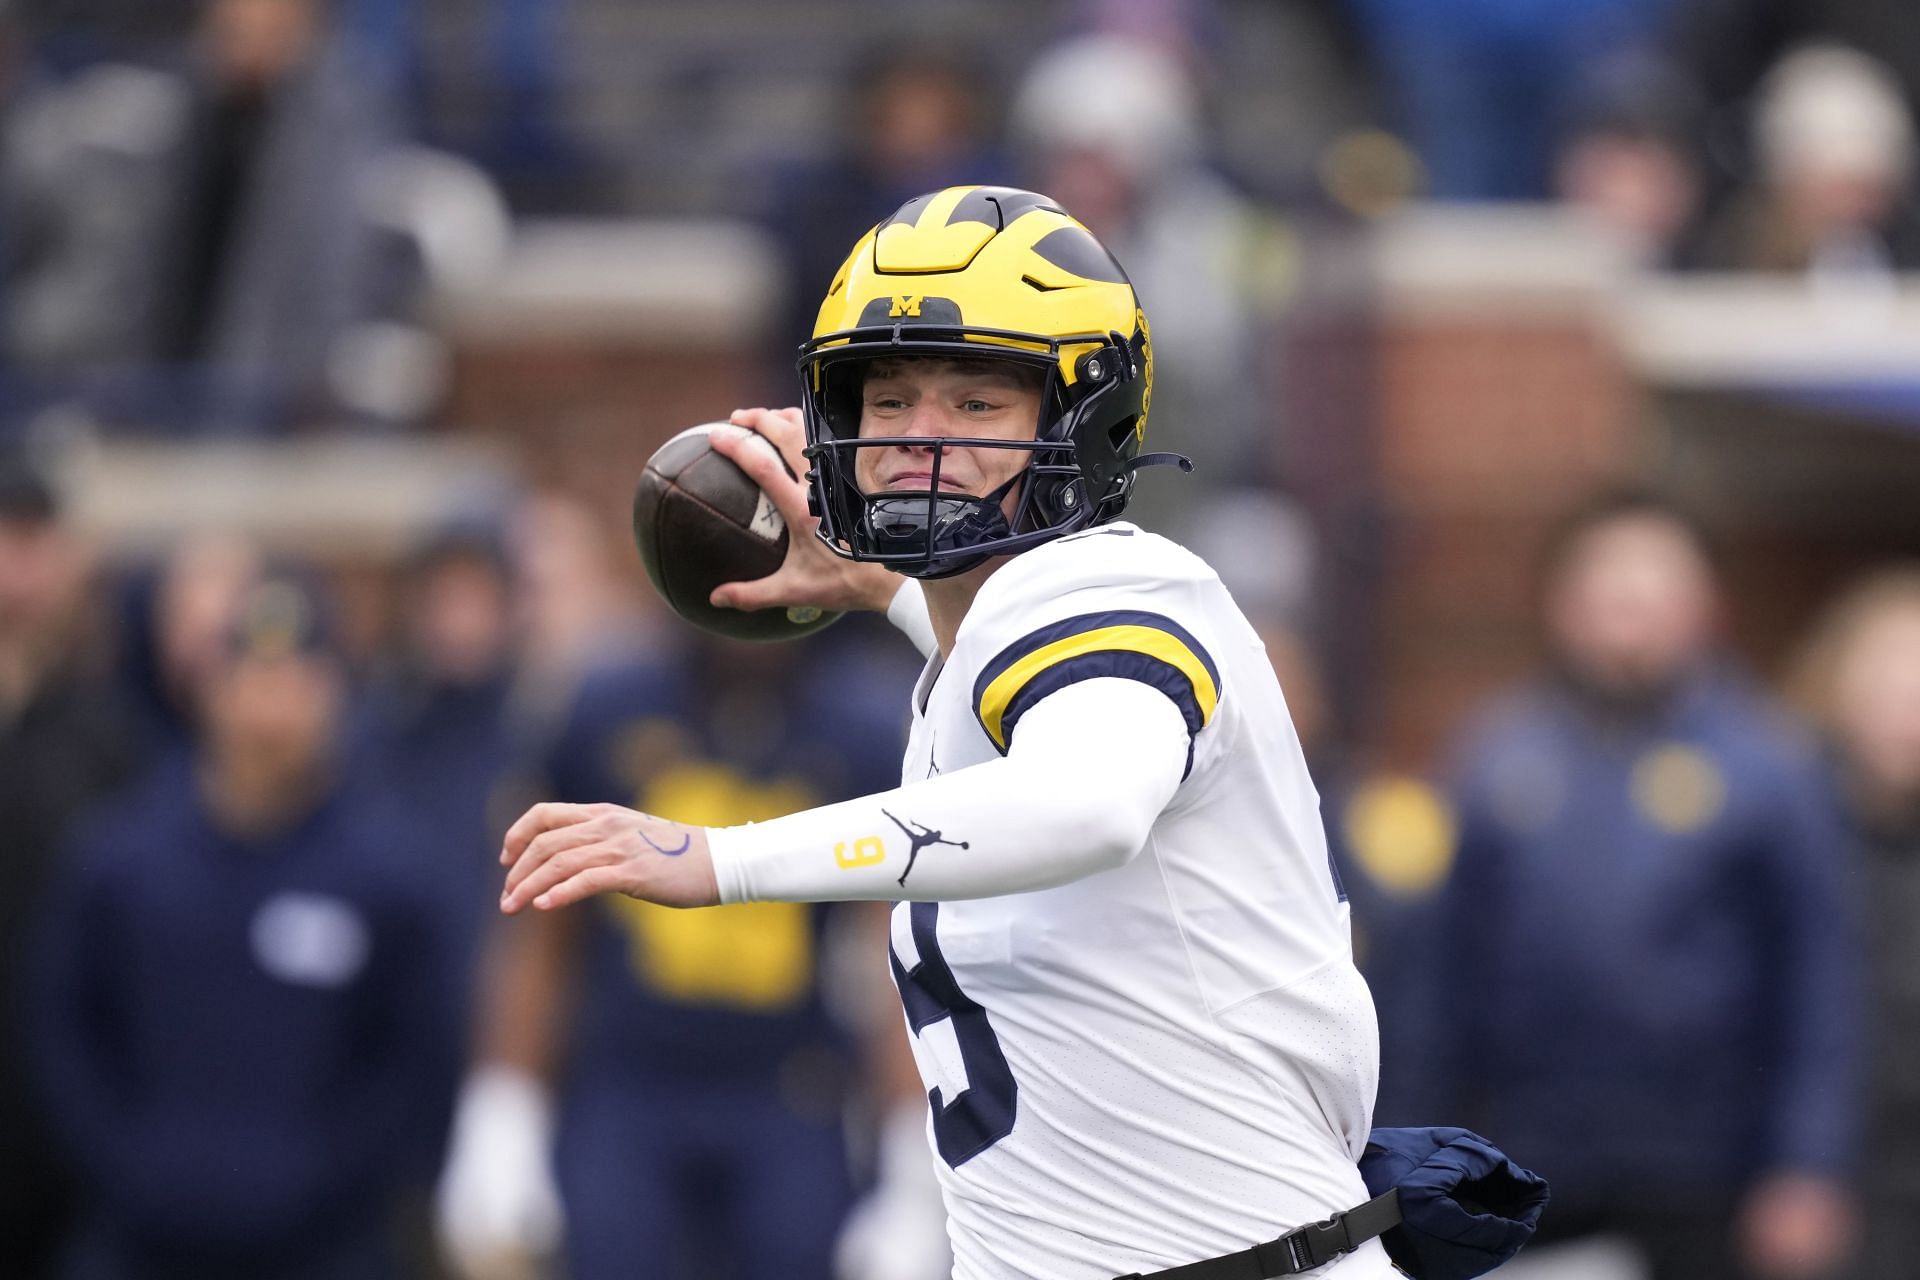 If Michigan QB J.J. McCarthy wins the Heisman his school would tie Ohio State in that department